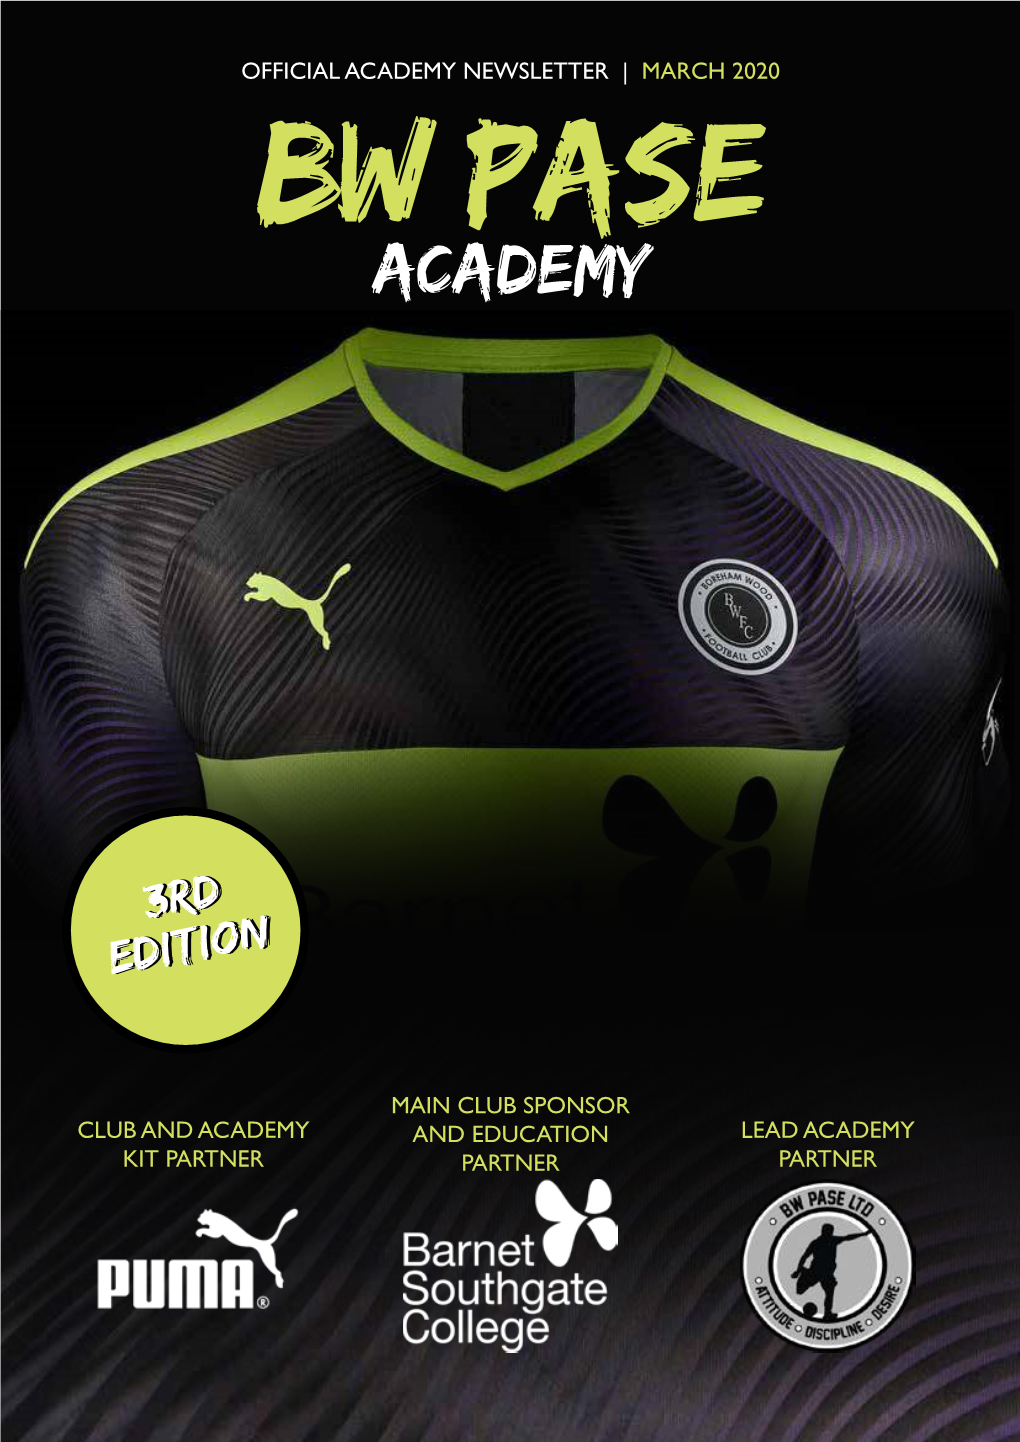 Academy Newsletter | March 2020 Bw Pase Academy